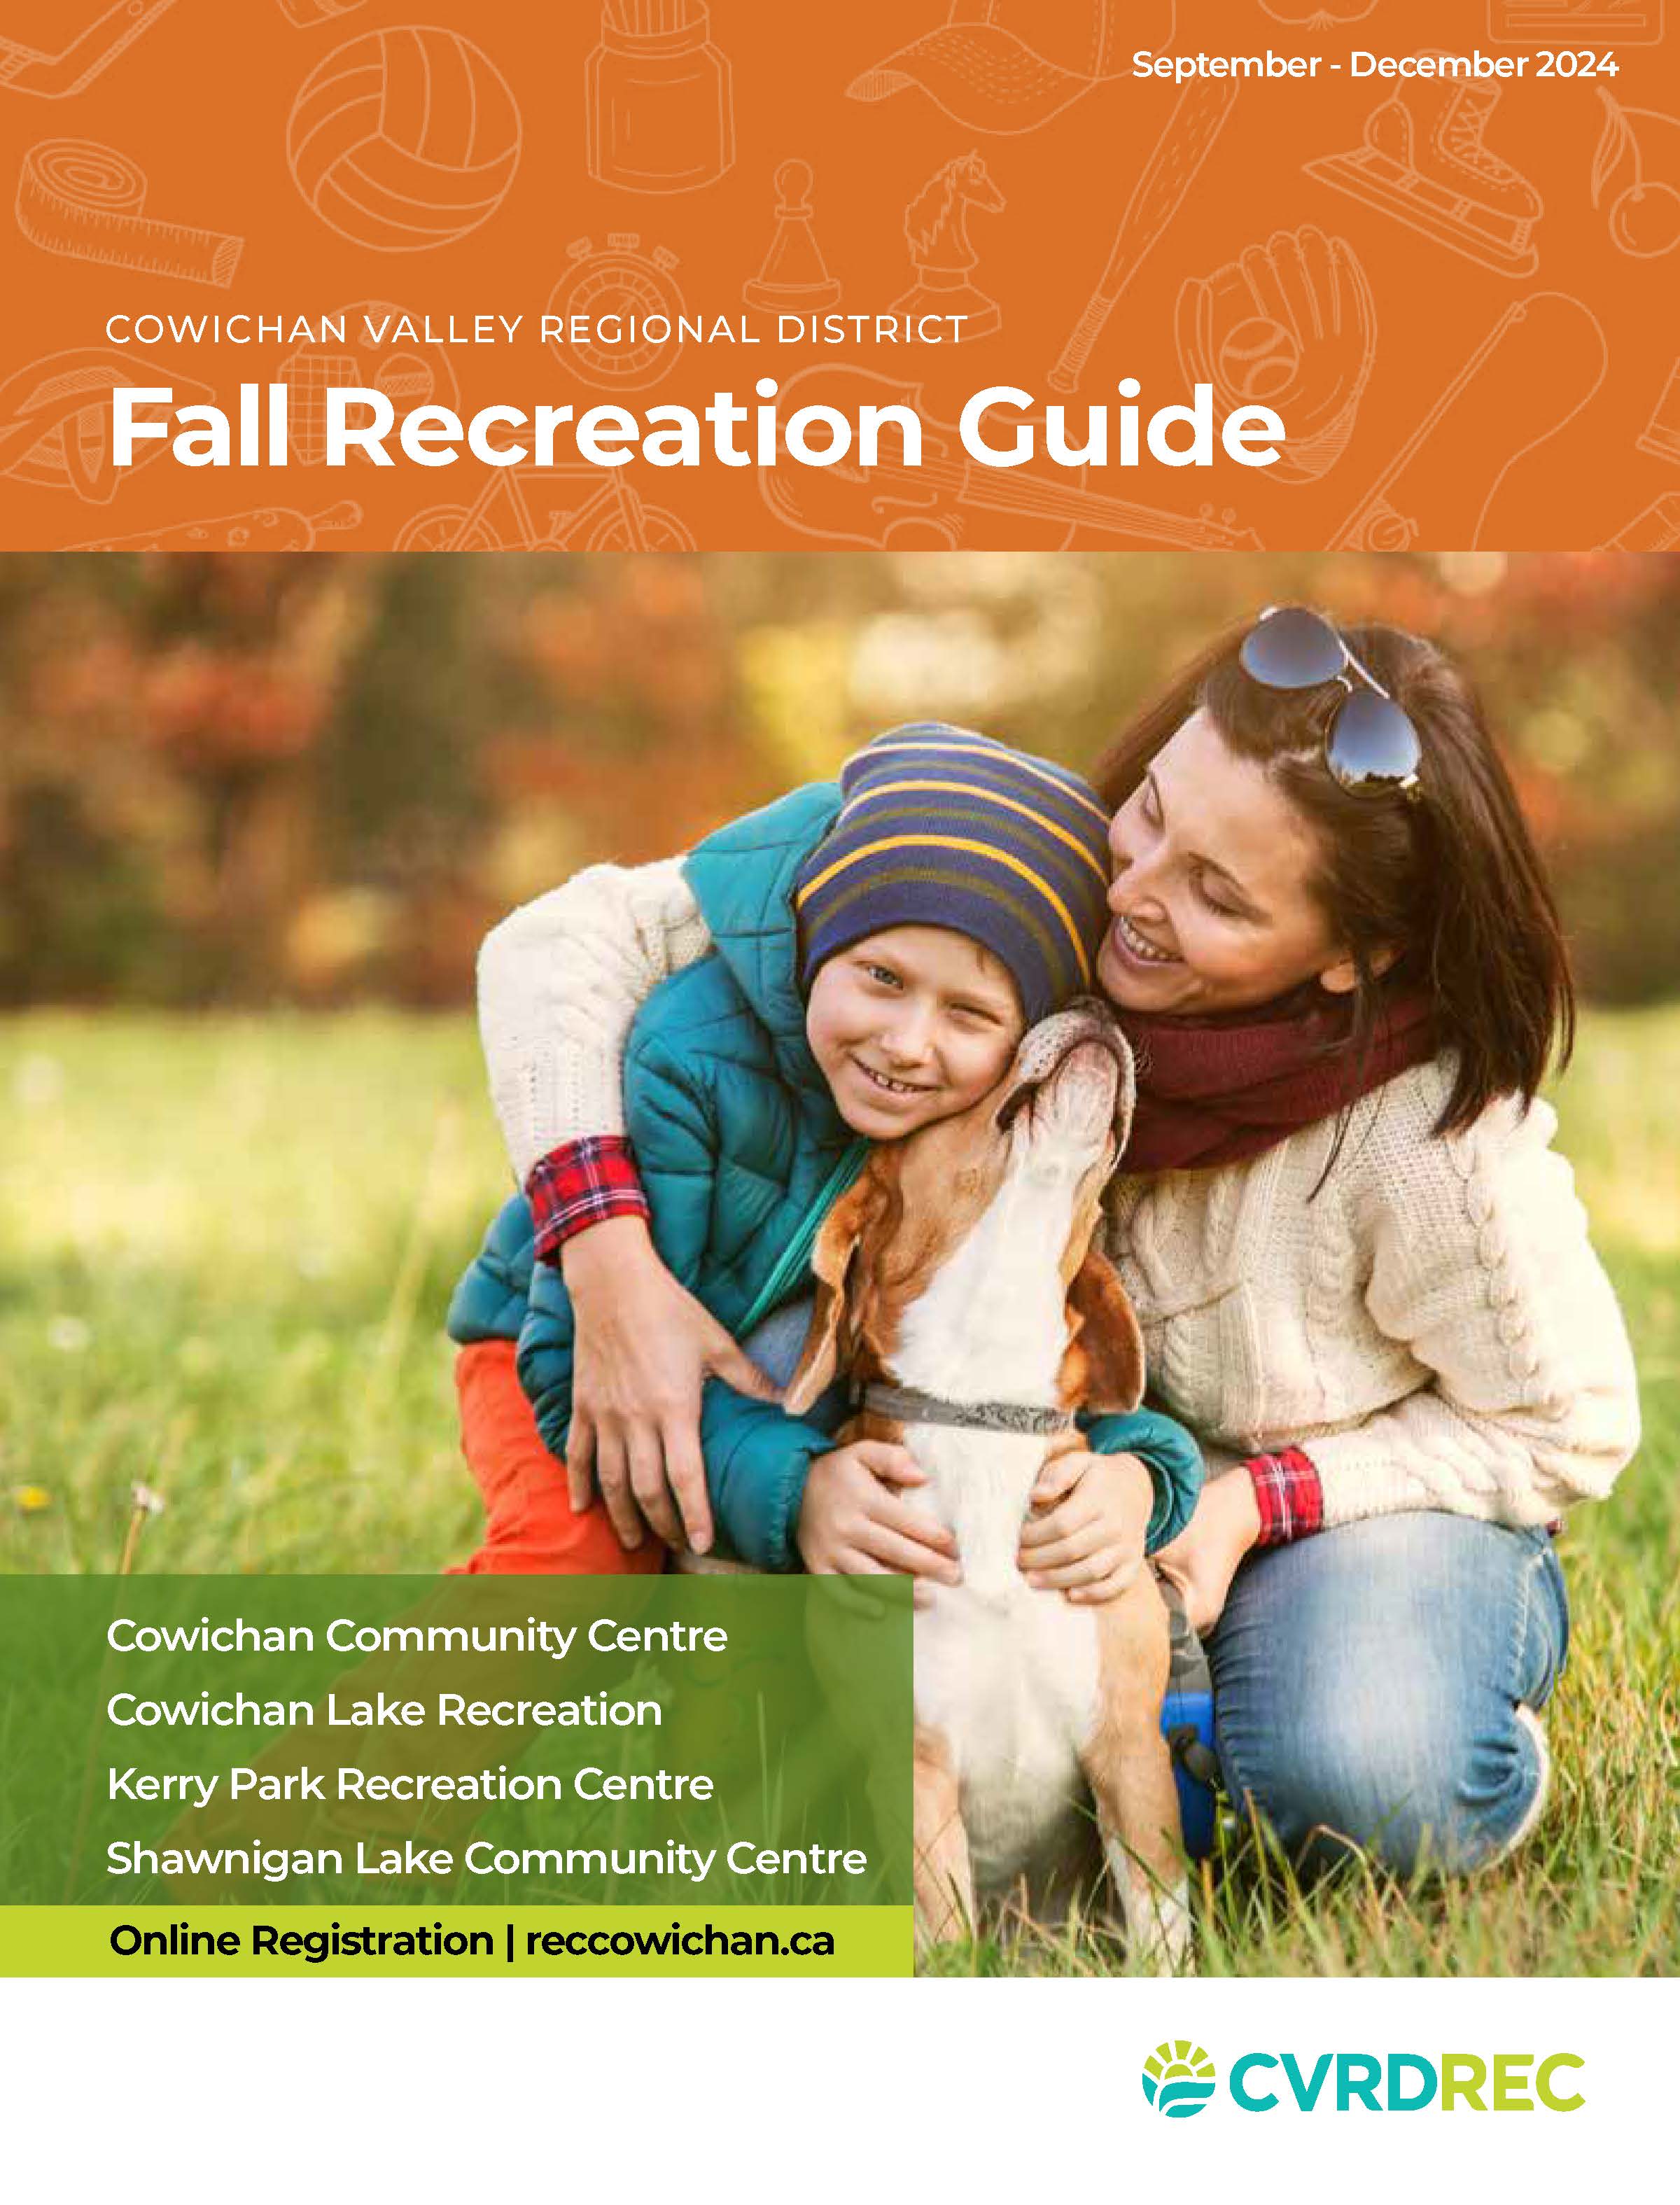 CVRD Recreation Guide Fall 2024 cover low res